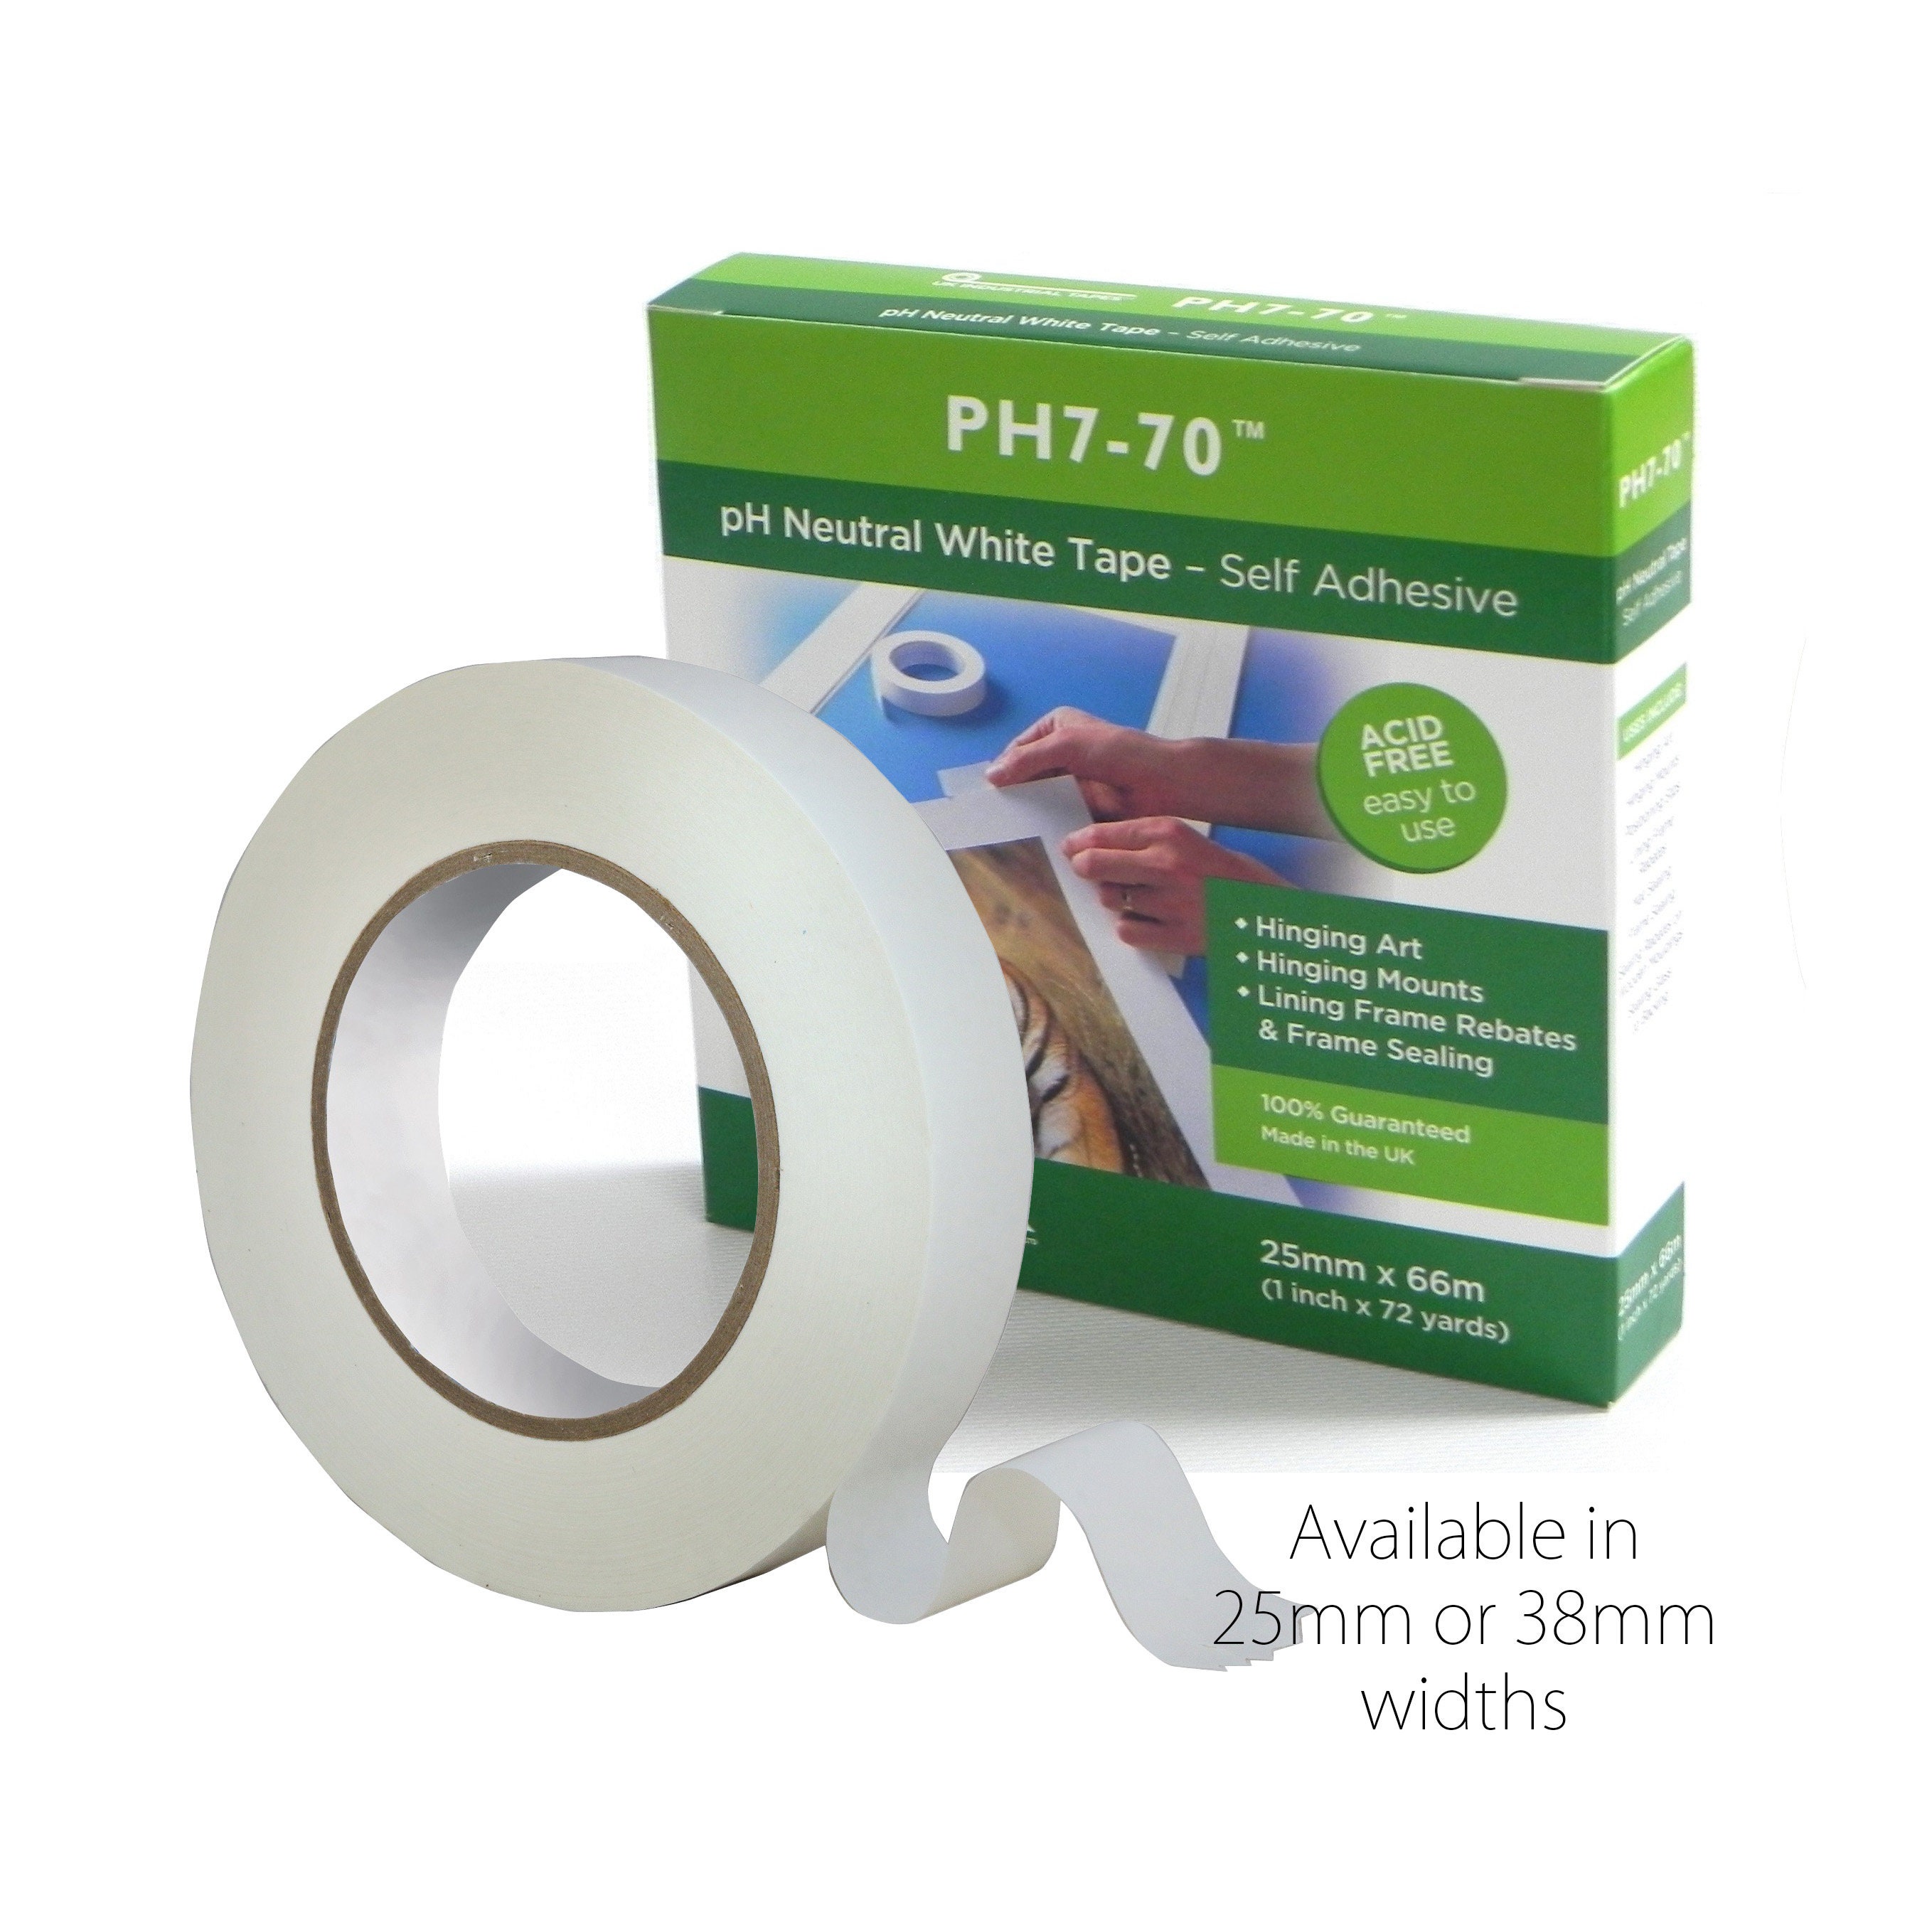 Water Soluble Basting Tape